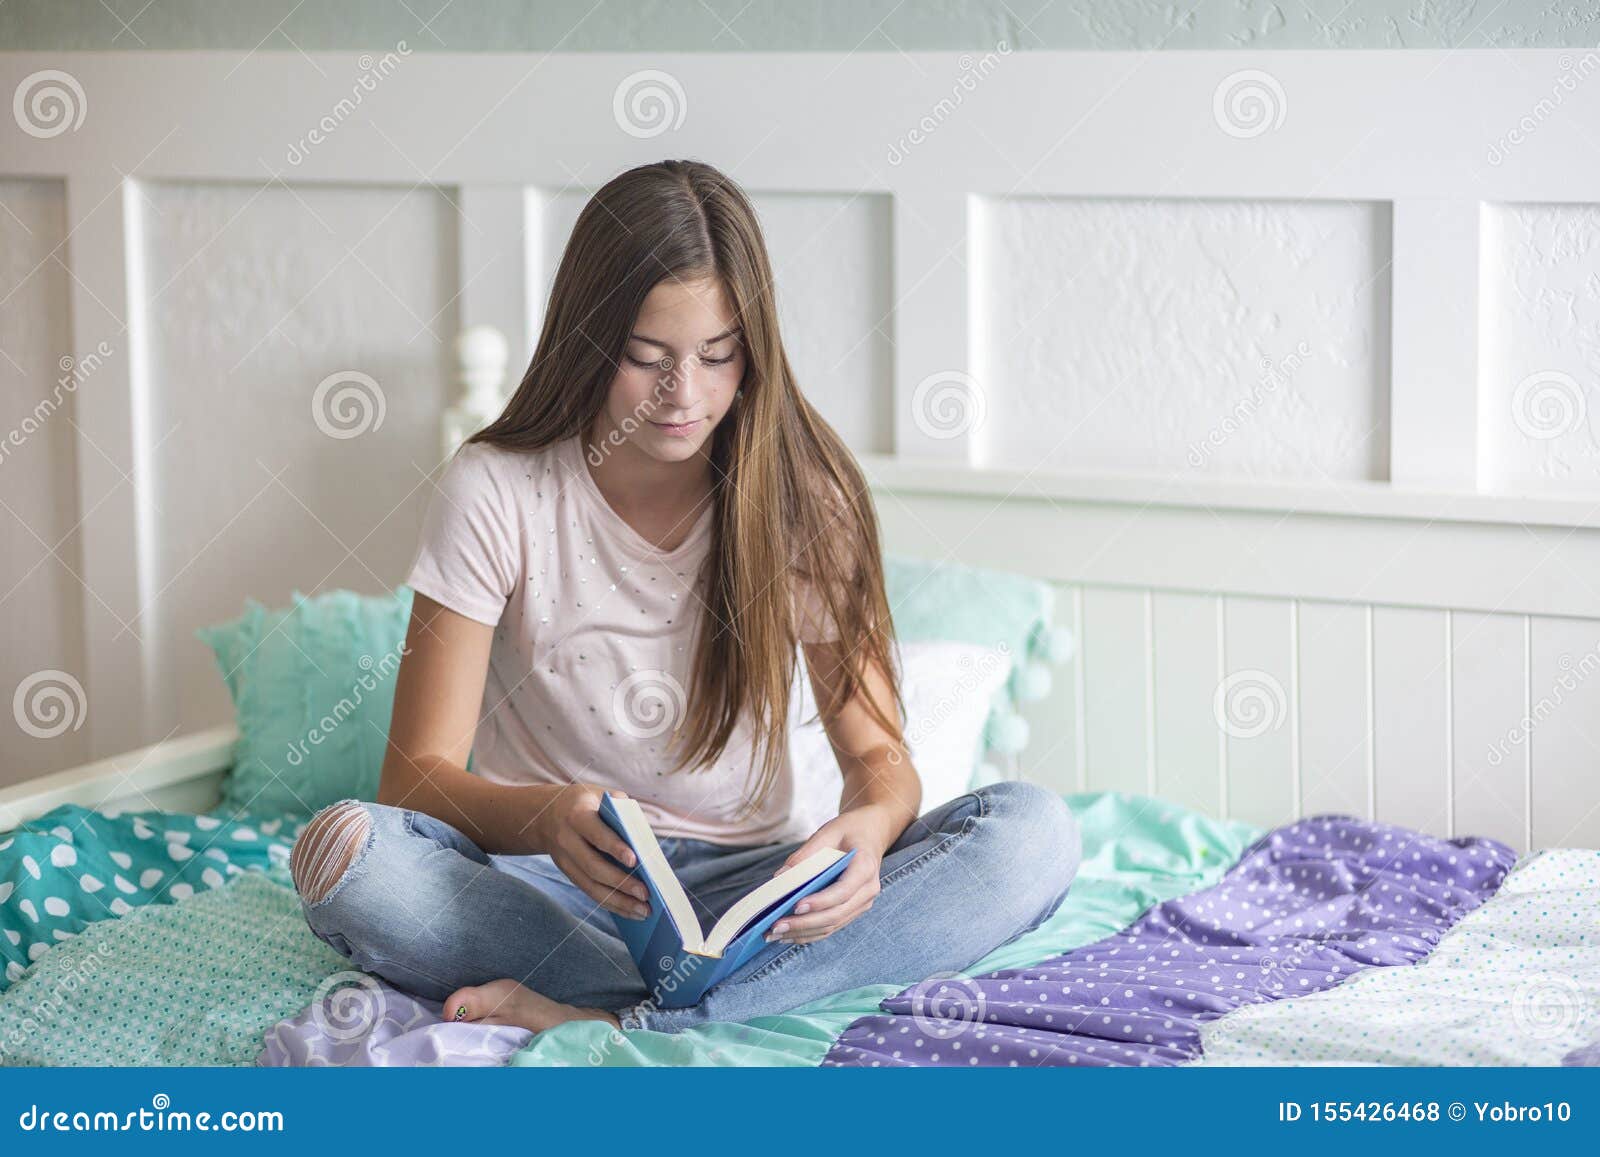 pre-adolescent teen girl reading a book lying in bed at home. candid indoor photo with focus on the foreground and copy space